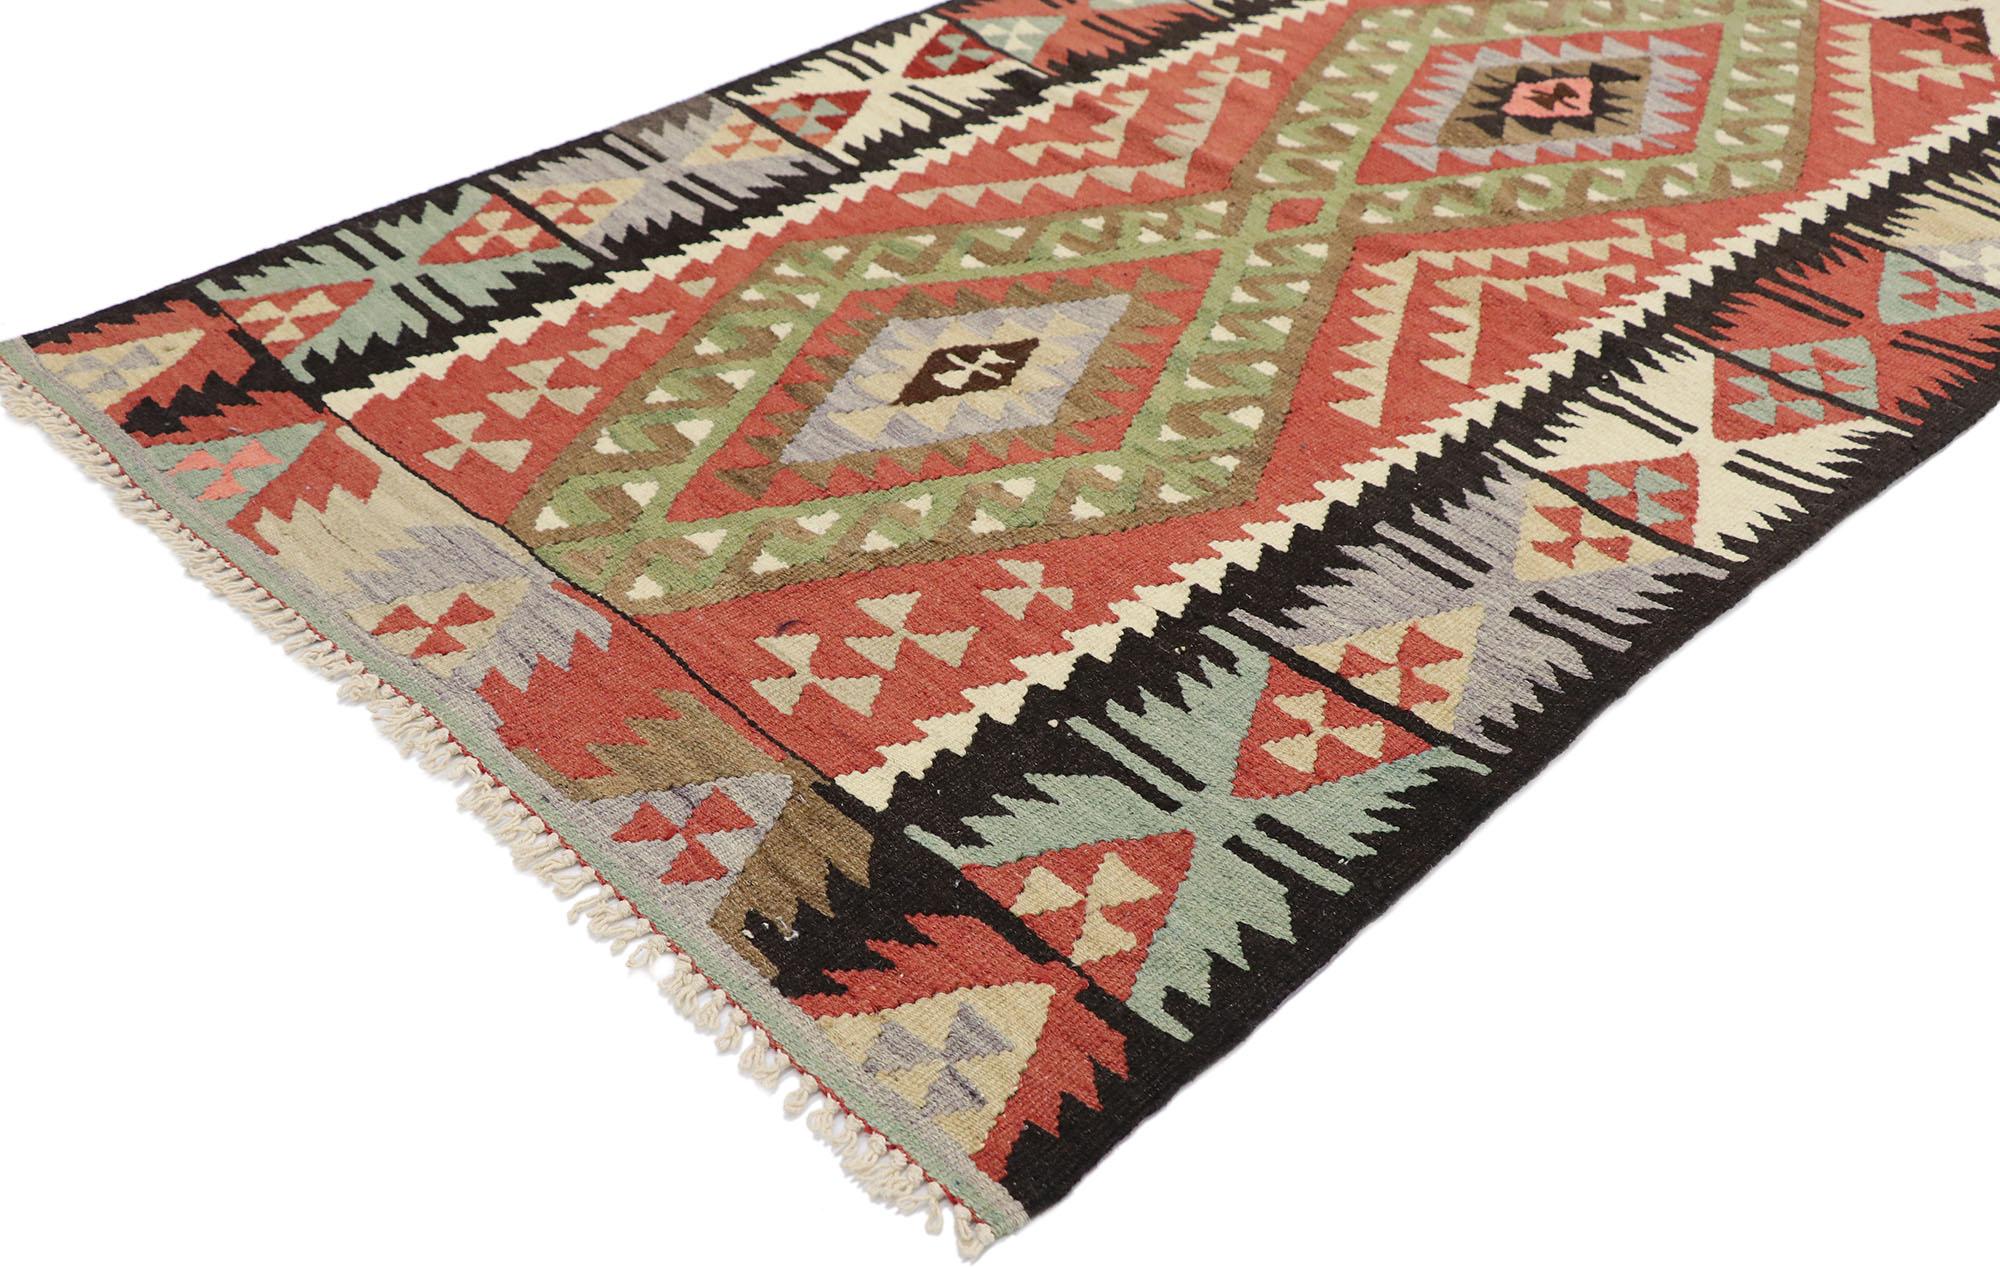 77832 vintage Persian Shiraz Kilim rug with Boho Chic Tribal style 03'00 x 05'00. Full of tiny details and a bold expressive design combined with vibrant colors and tribal style, this hand-woven wool vintage Persian Shiraz kilim rug is a captivating